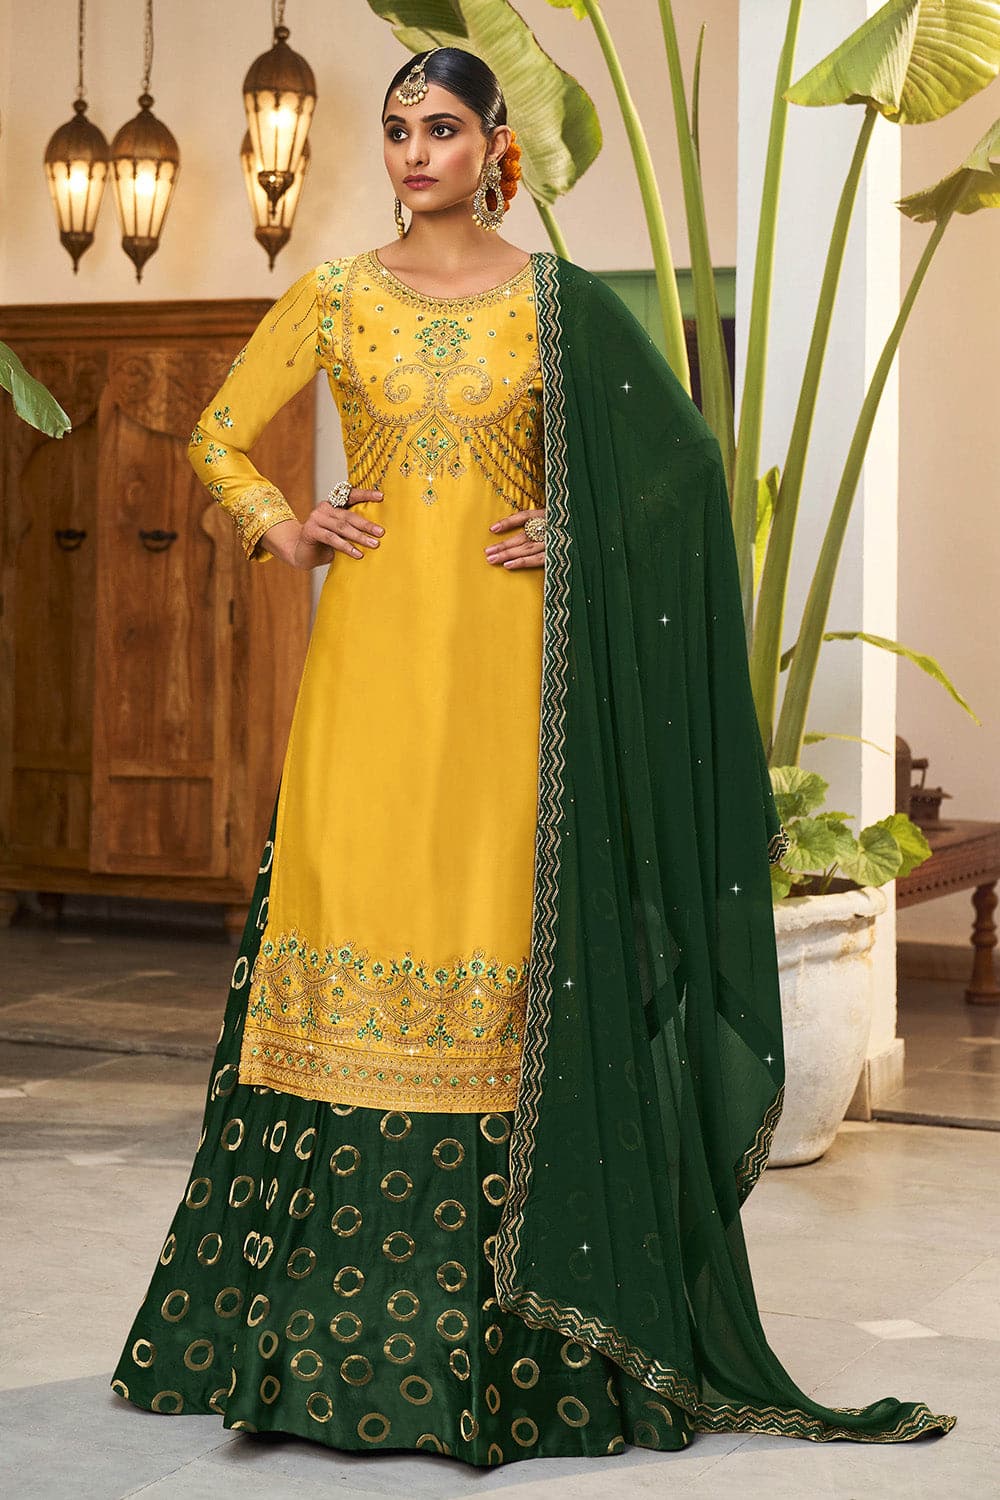 50 Latest Yellow Salwar Suit Designs for Weddings and Festivals (2022) -  Tips and Beauty | Salwar suit designs, Latest salwar suit designs, Suit  designs